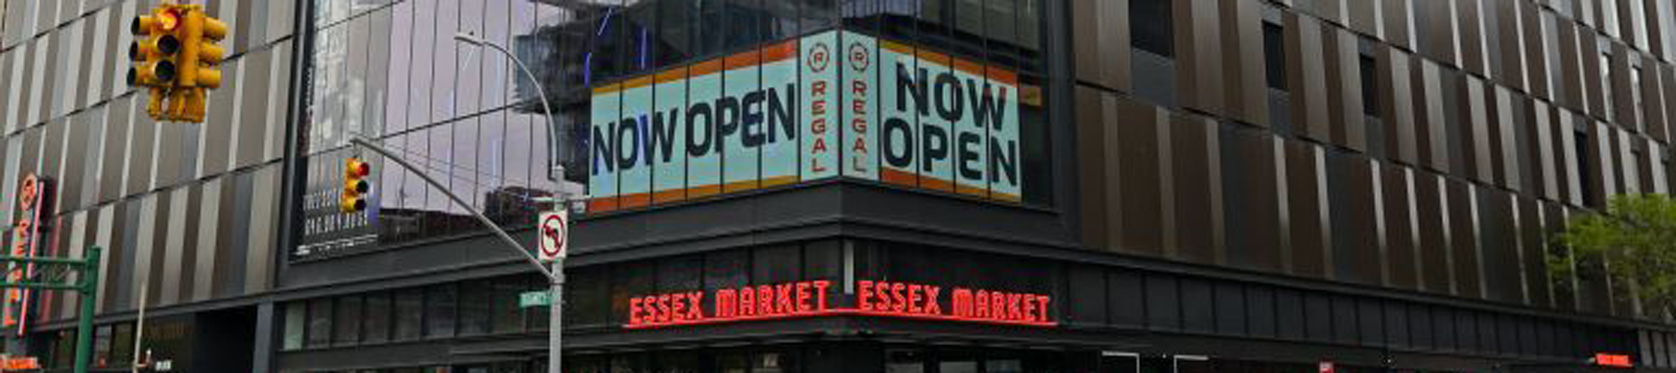 The Entrance to Essex Market